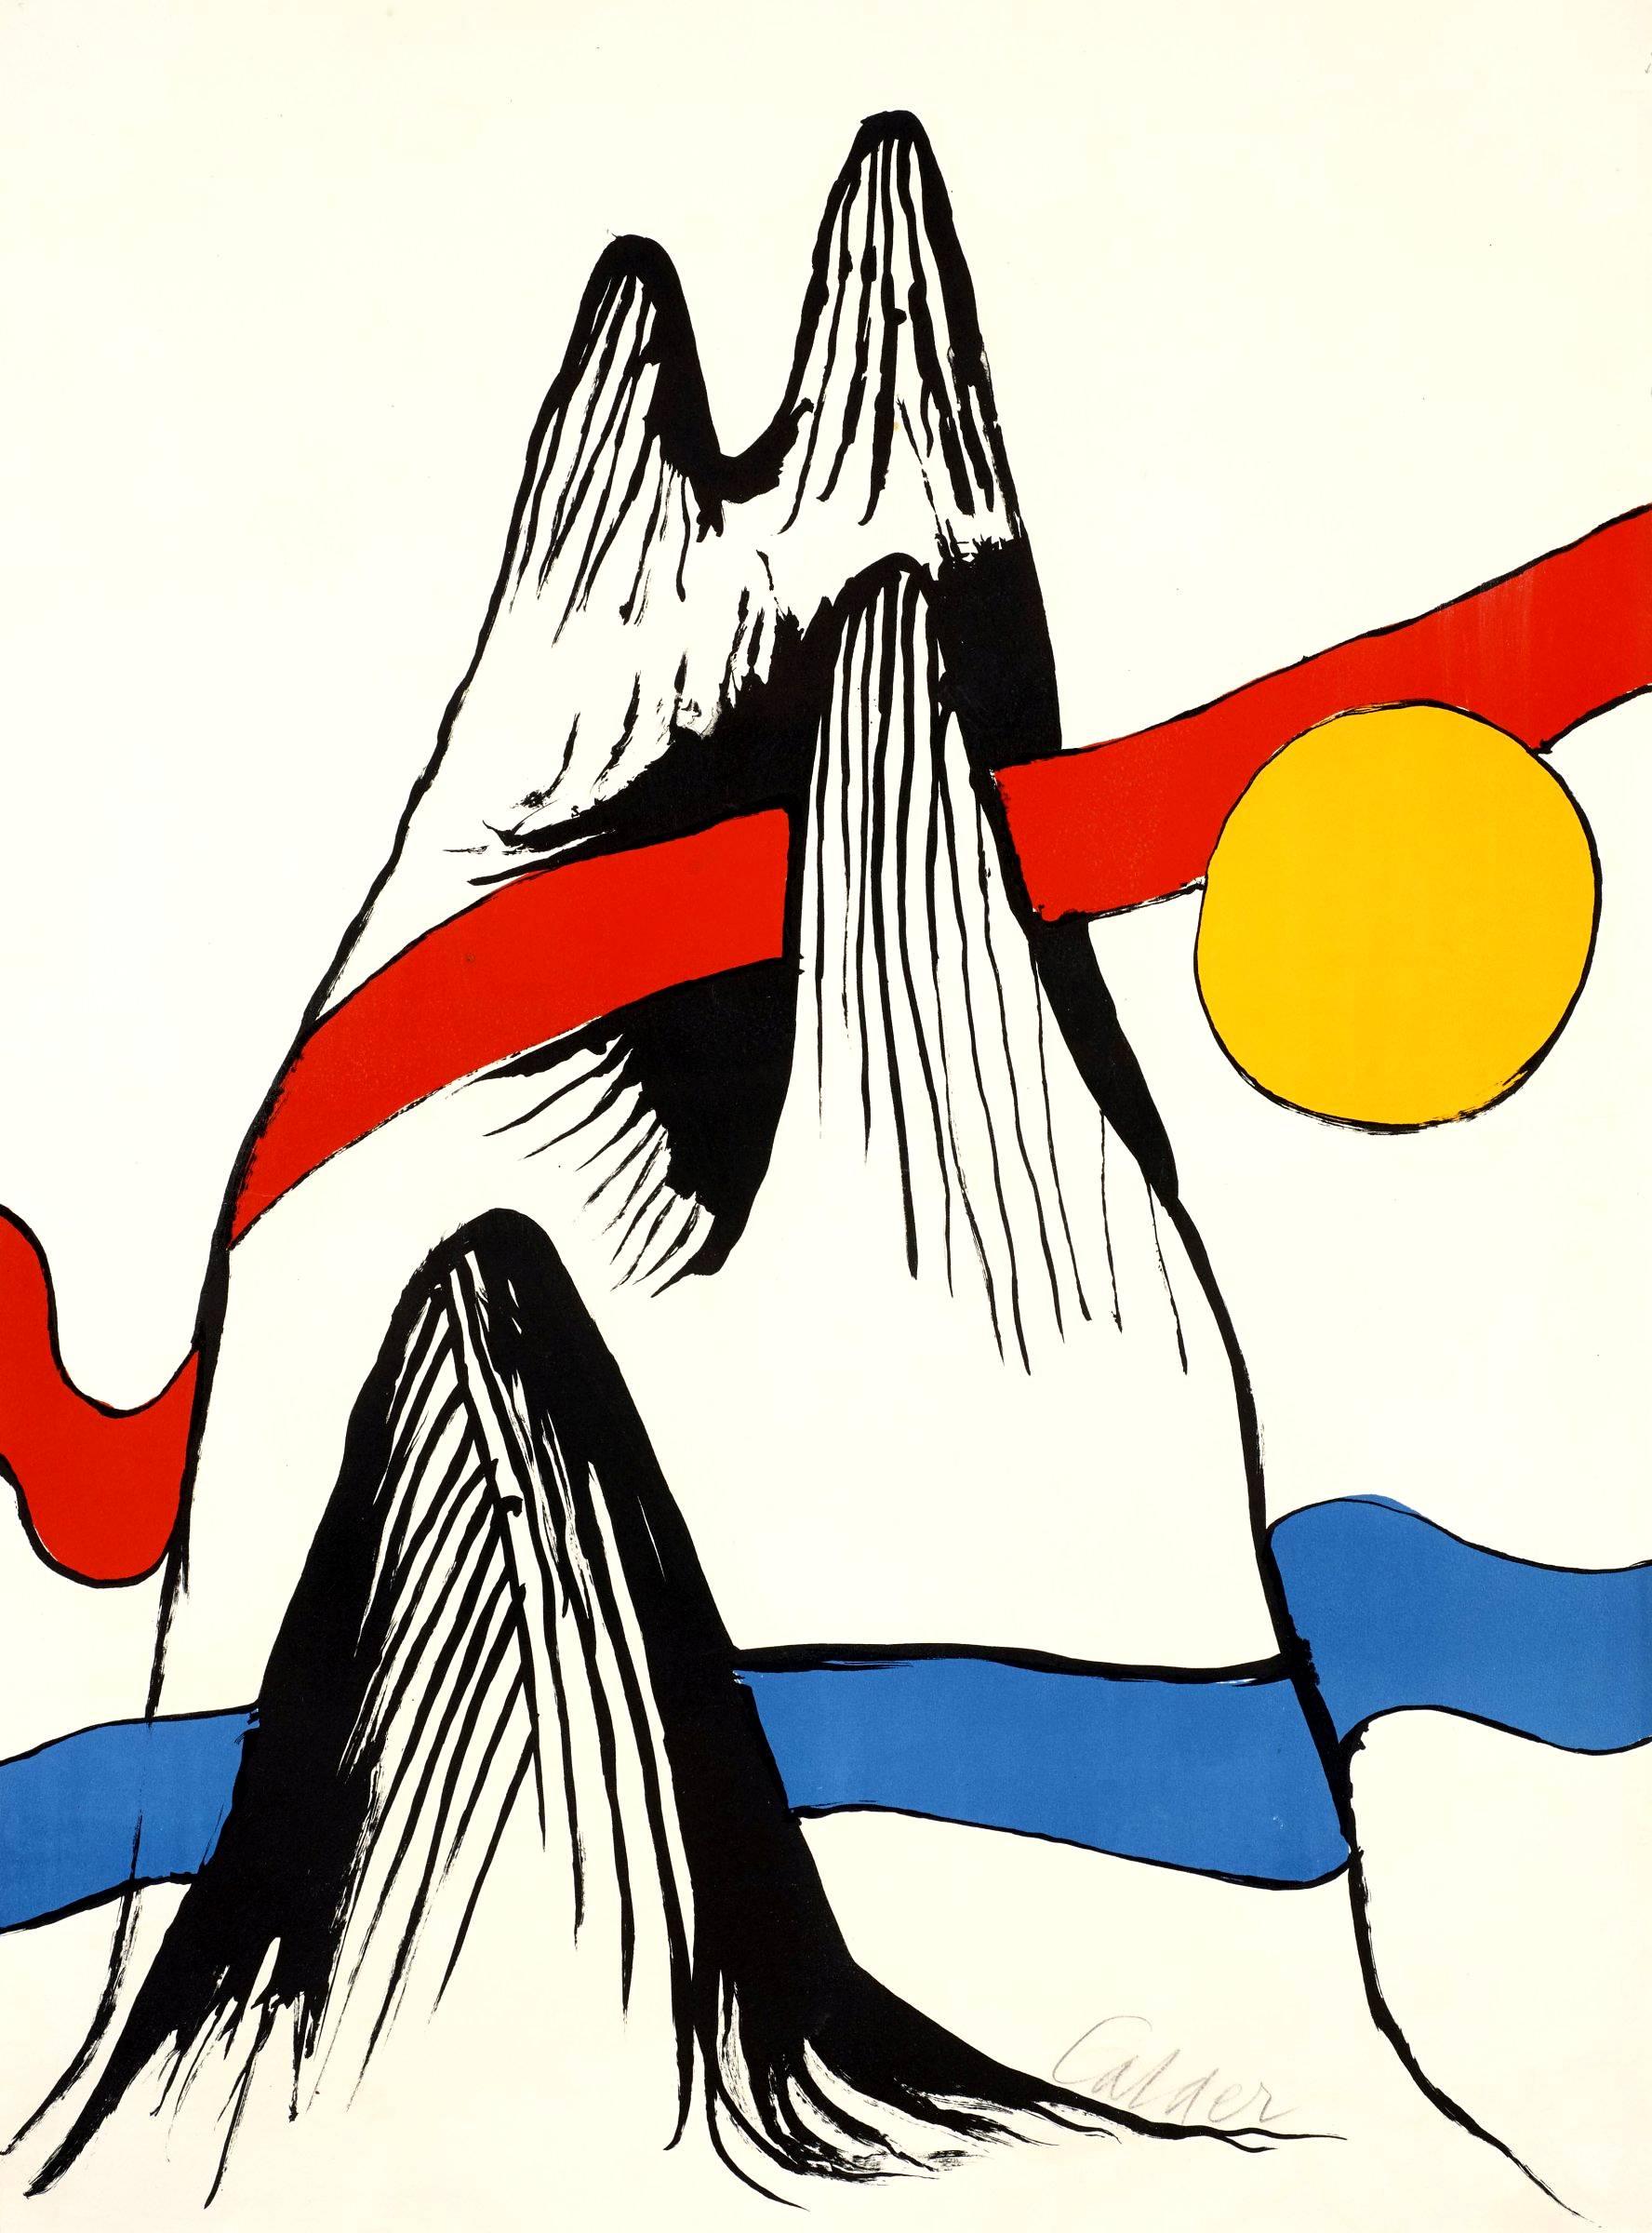 Alexander Calder - Mountain and Sun 
Handsigned Lithograph 
h: 74,20 w: 55 cm
Circa 1970 


Alexander Calder (1898 - 1976)

The American artist Alexander Calder was born in Philadelphia in 1898. He studies engineering from 1915 to 1919 at the